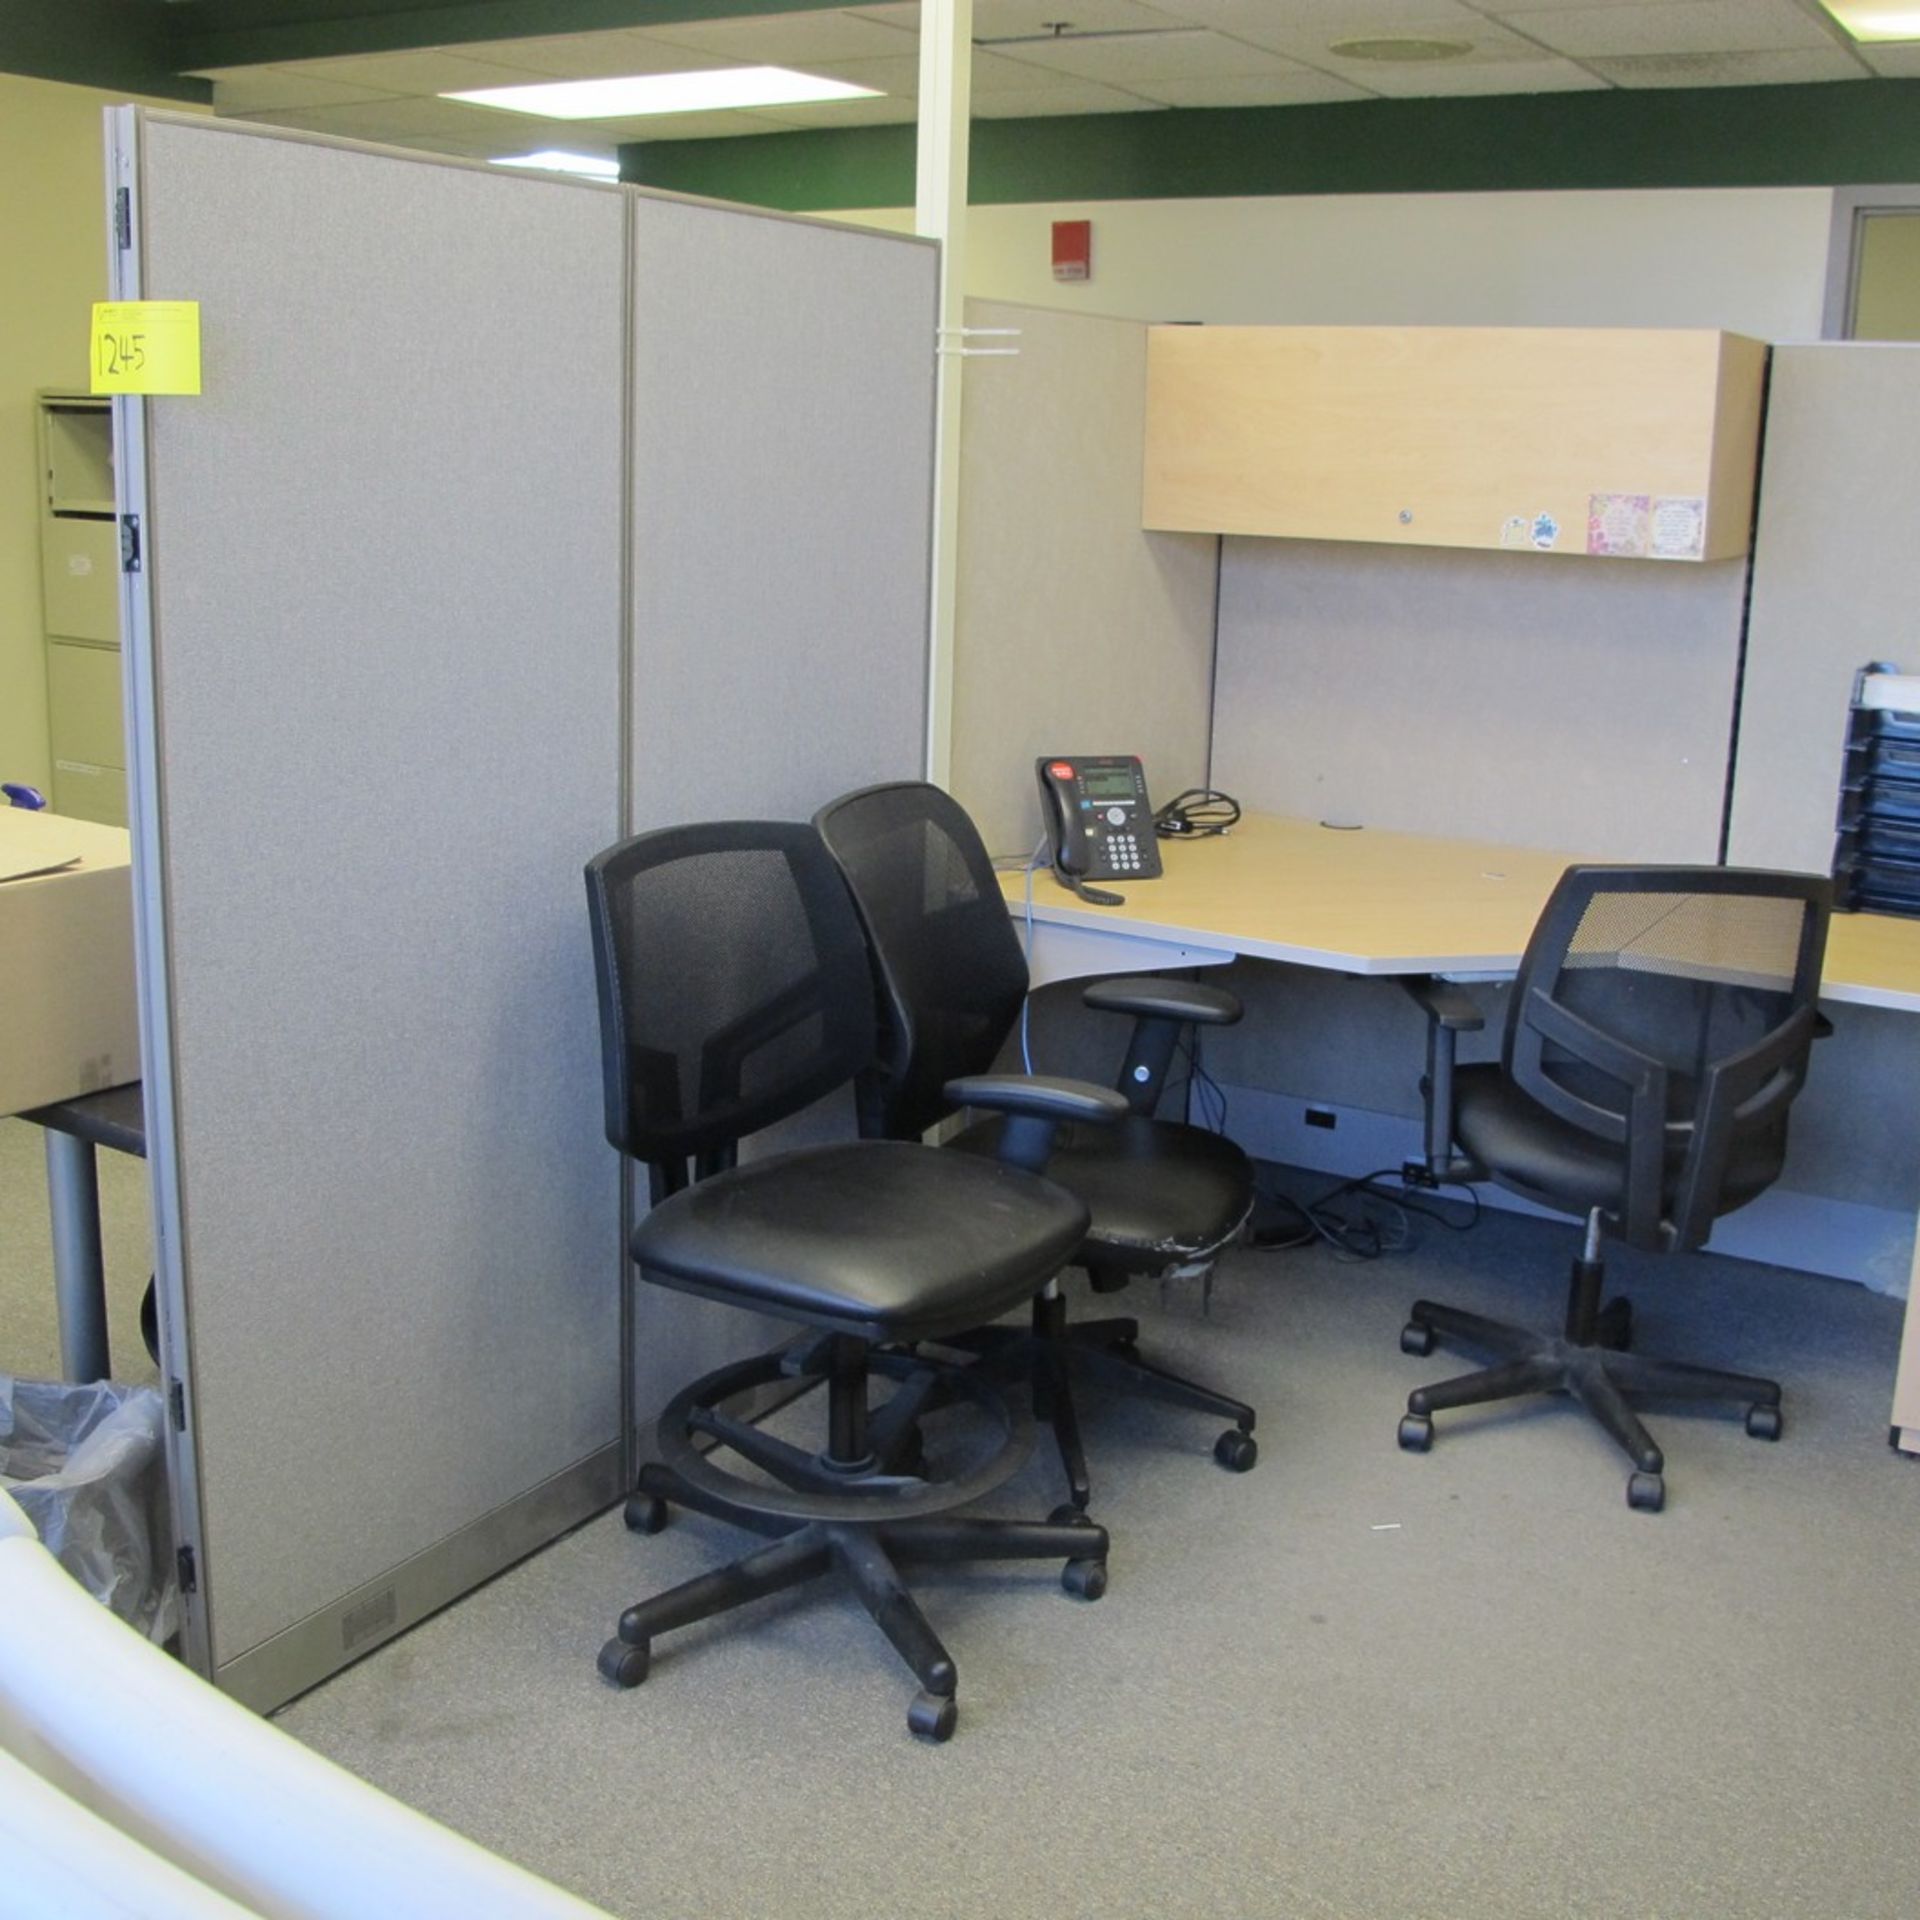 LOT OF 2-PERSON WORKSATION W/ DIVIDERS, UPPER CABINETS, DESKS, (5) FILE CABINETS, TABLE, SMALL DESK, - Image 2 of 7